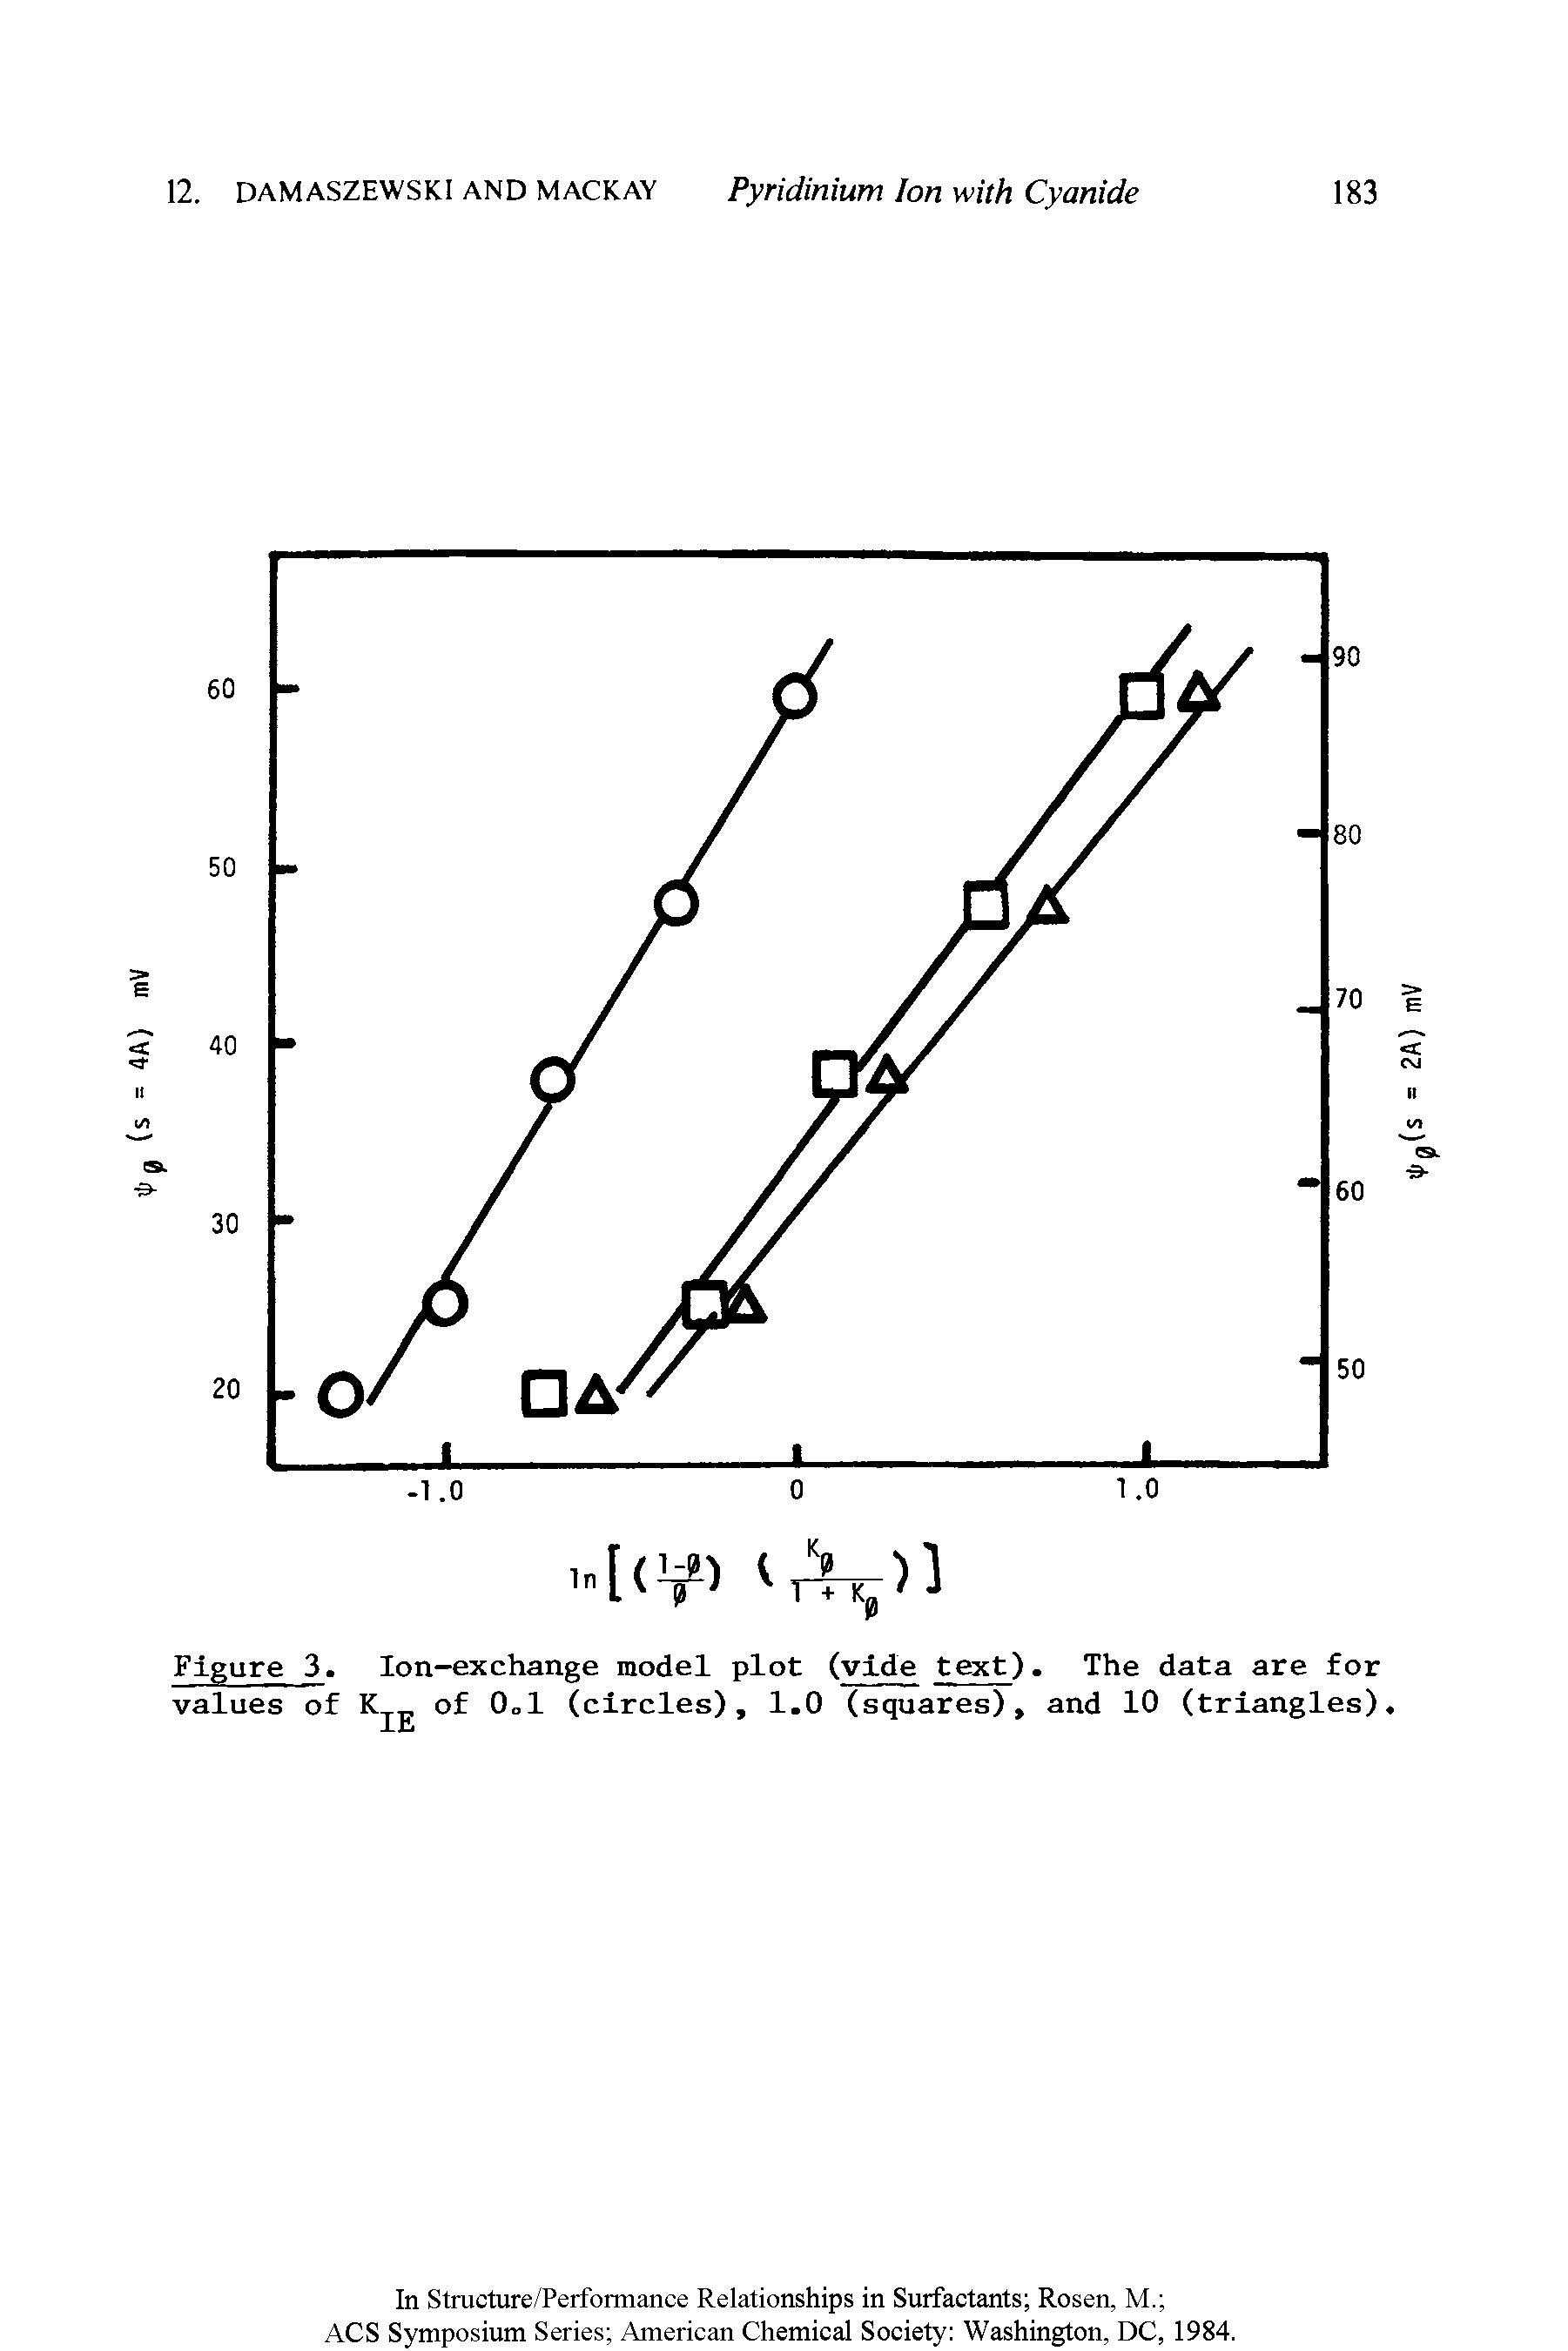 Figure 3. Ion-exchange model plot (vide text). The data are for...